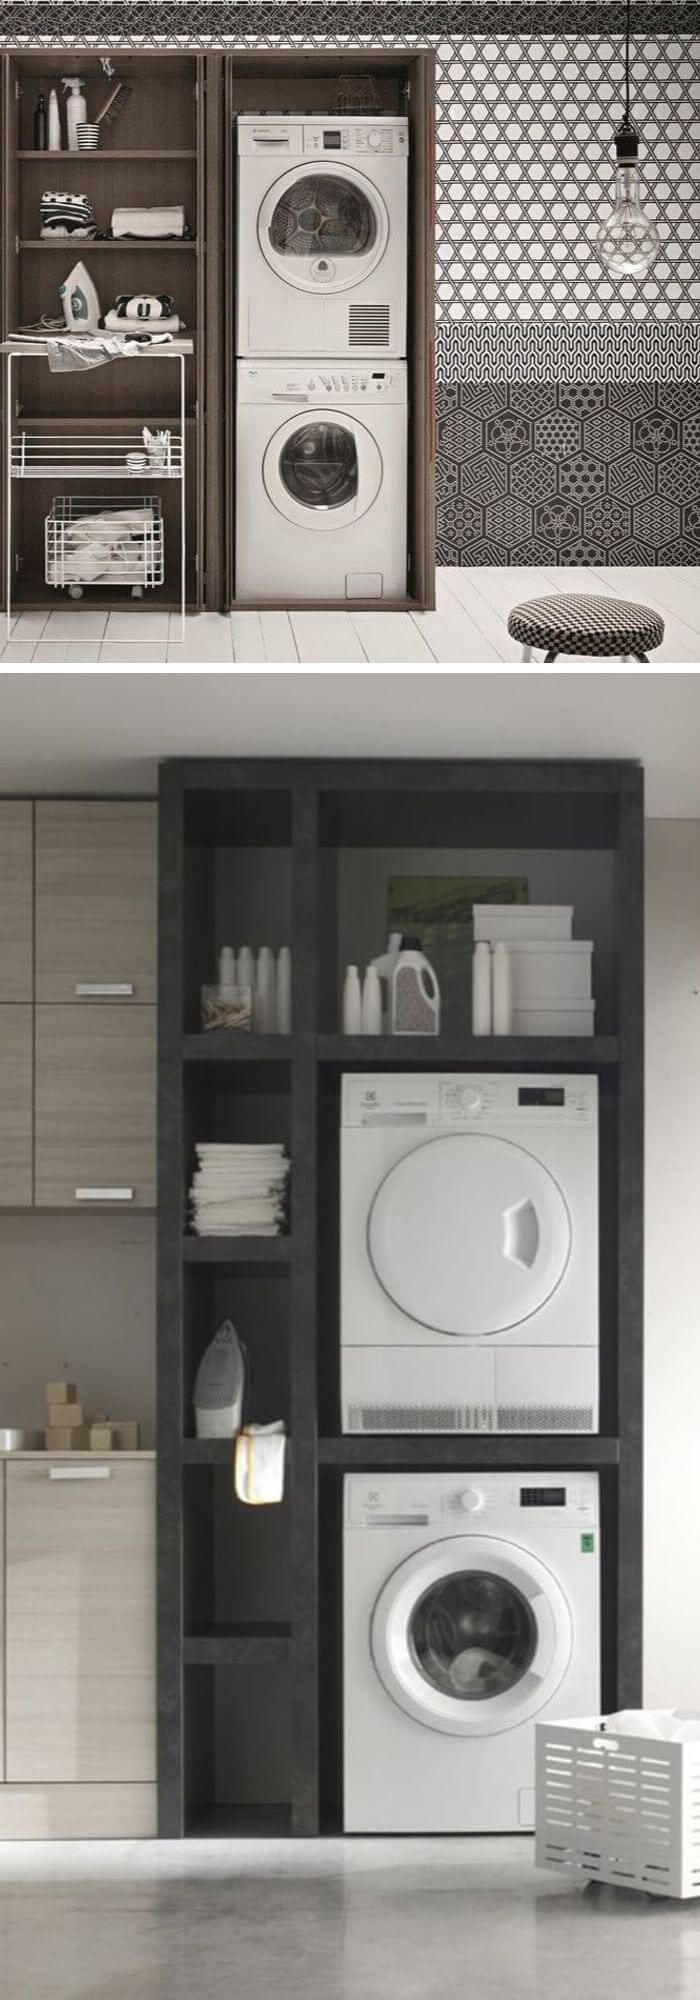 10 storage ideas for small spaces